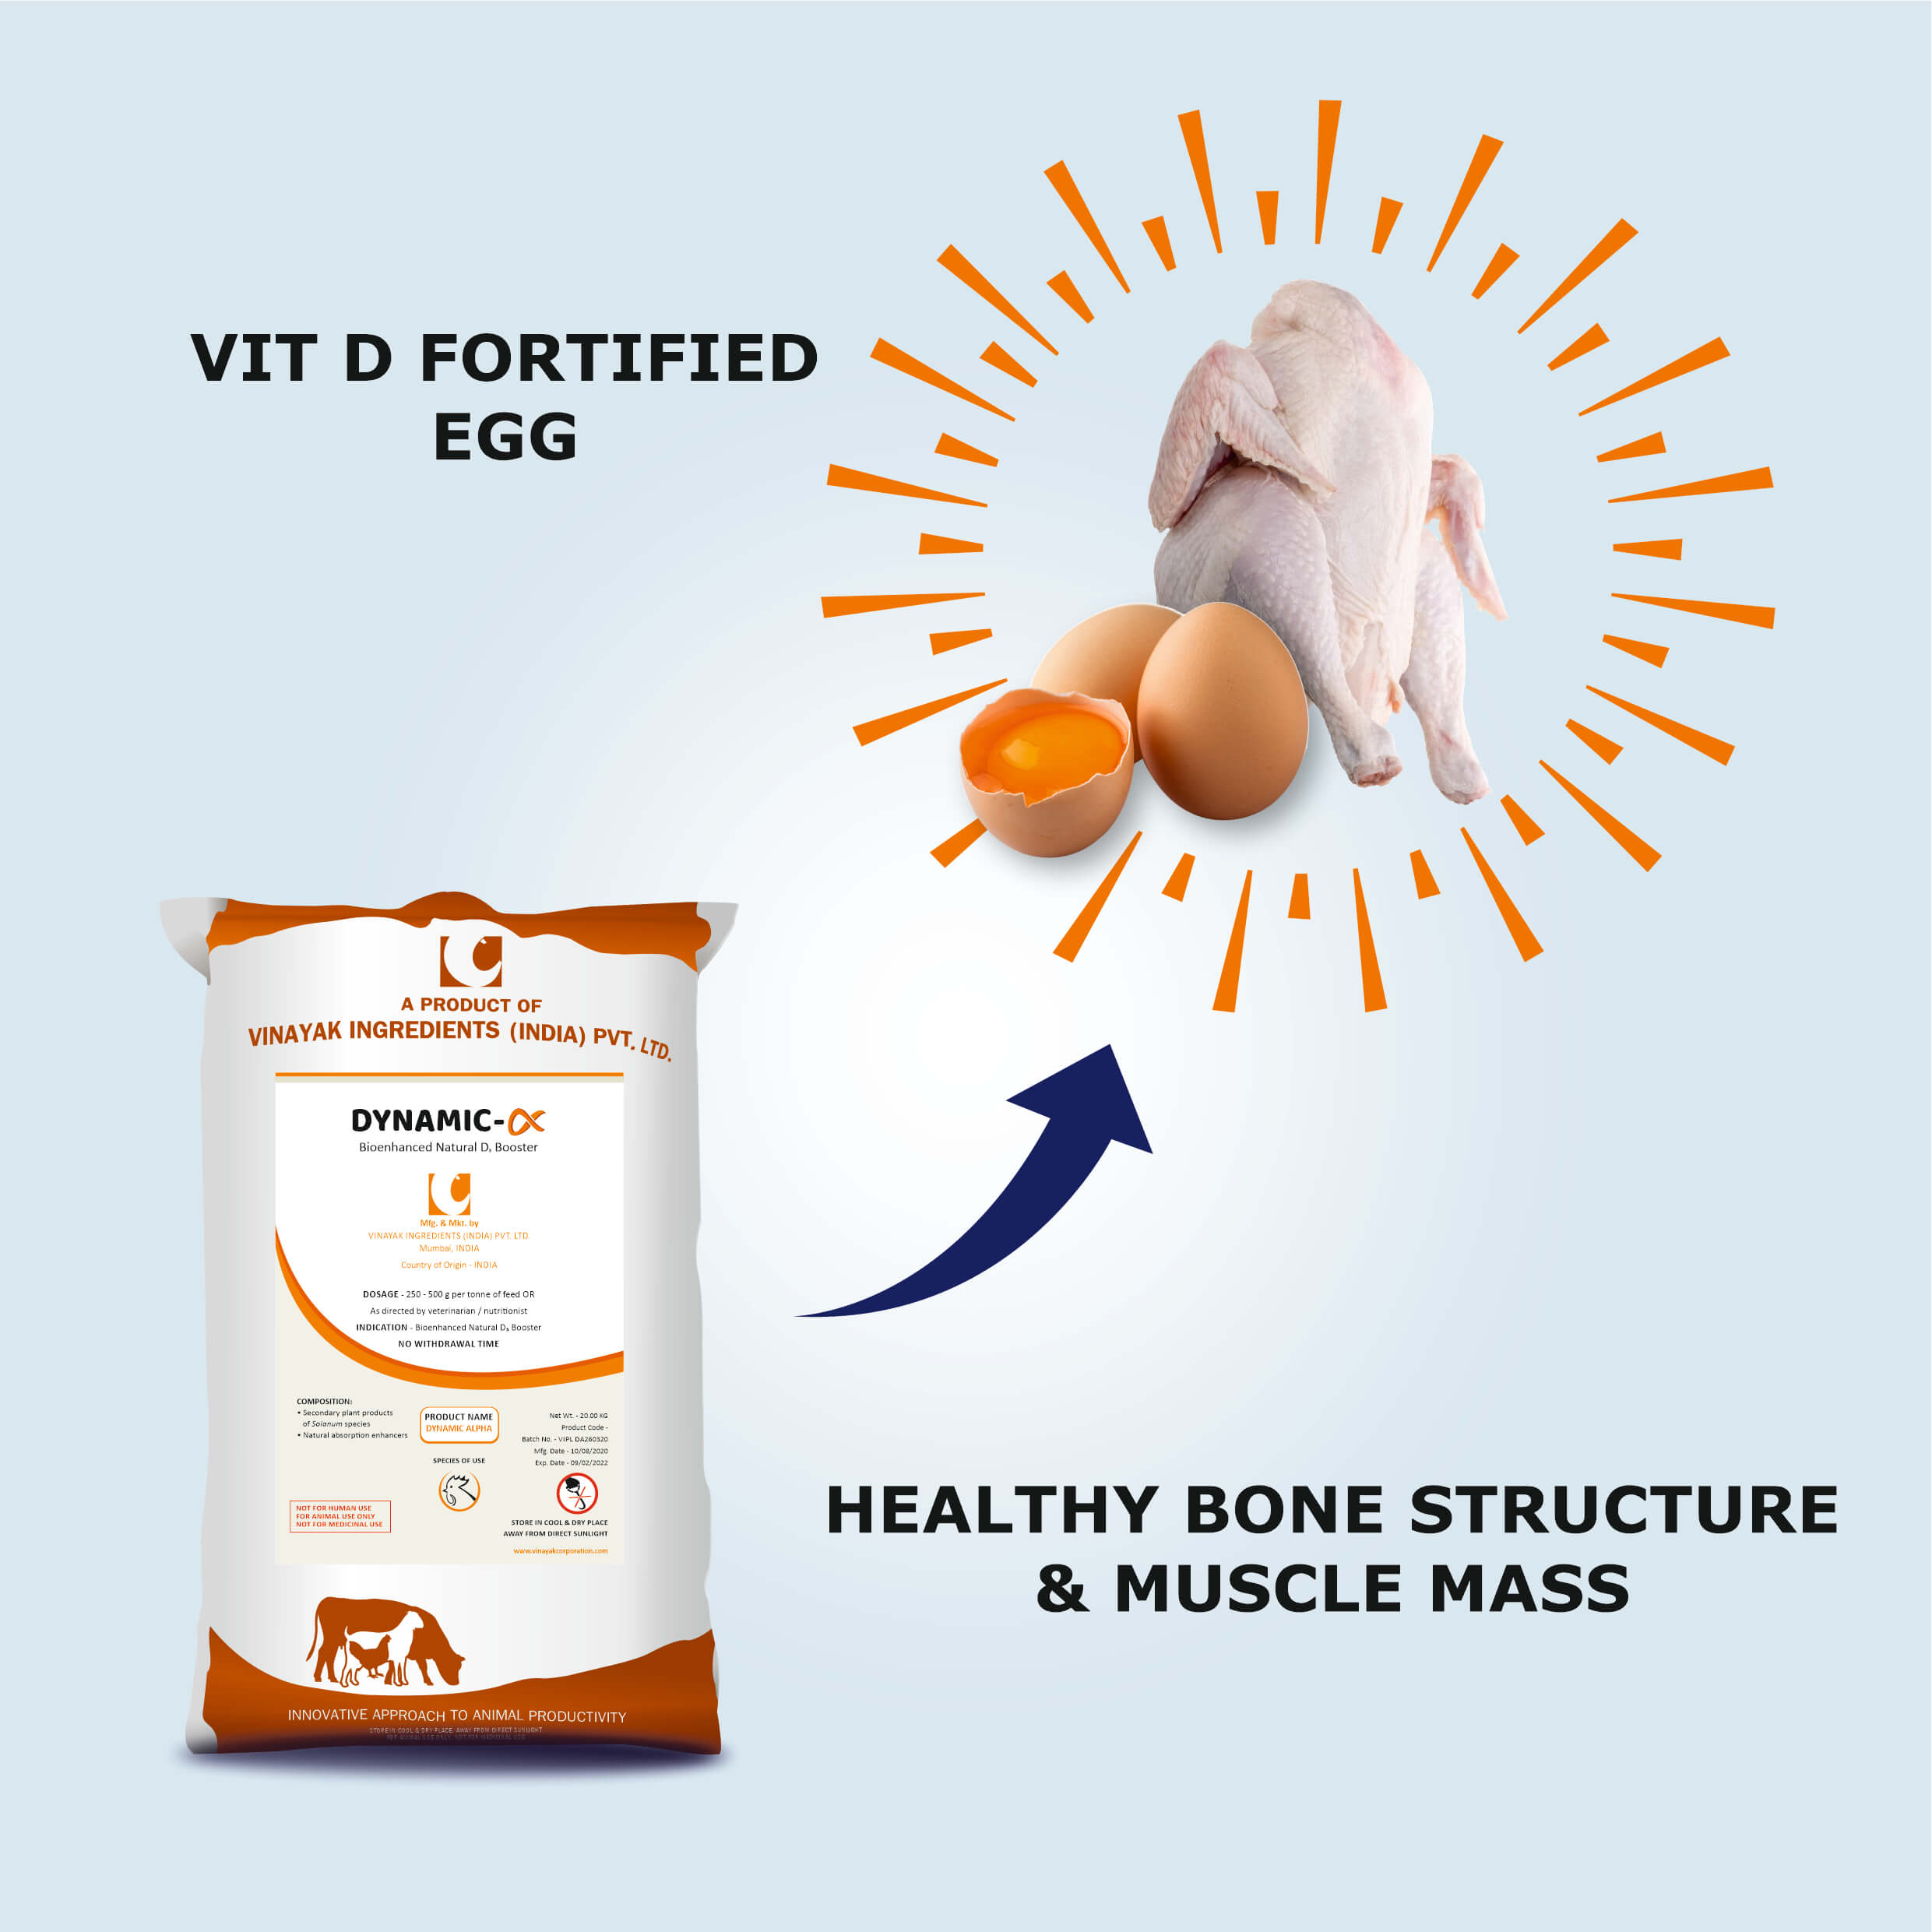 Organic vitamin d supplement in poultry - Natural vitamin for Layer - vitamin D for layer Chicken - Vinayak Ingredients India - Herbal feed supplements for Chicken farm